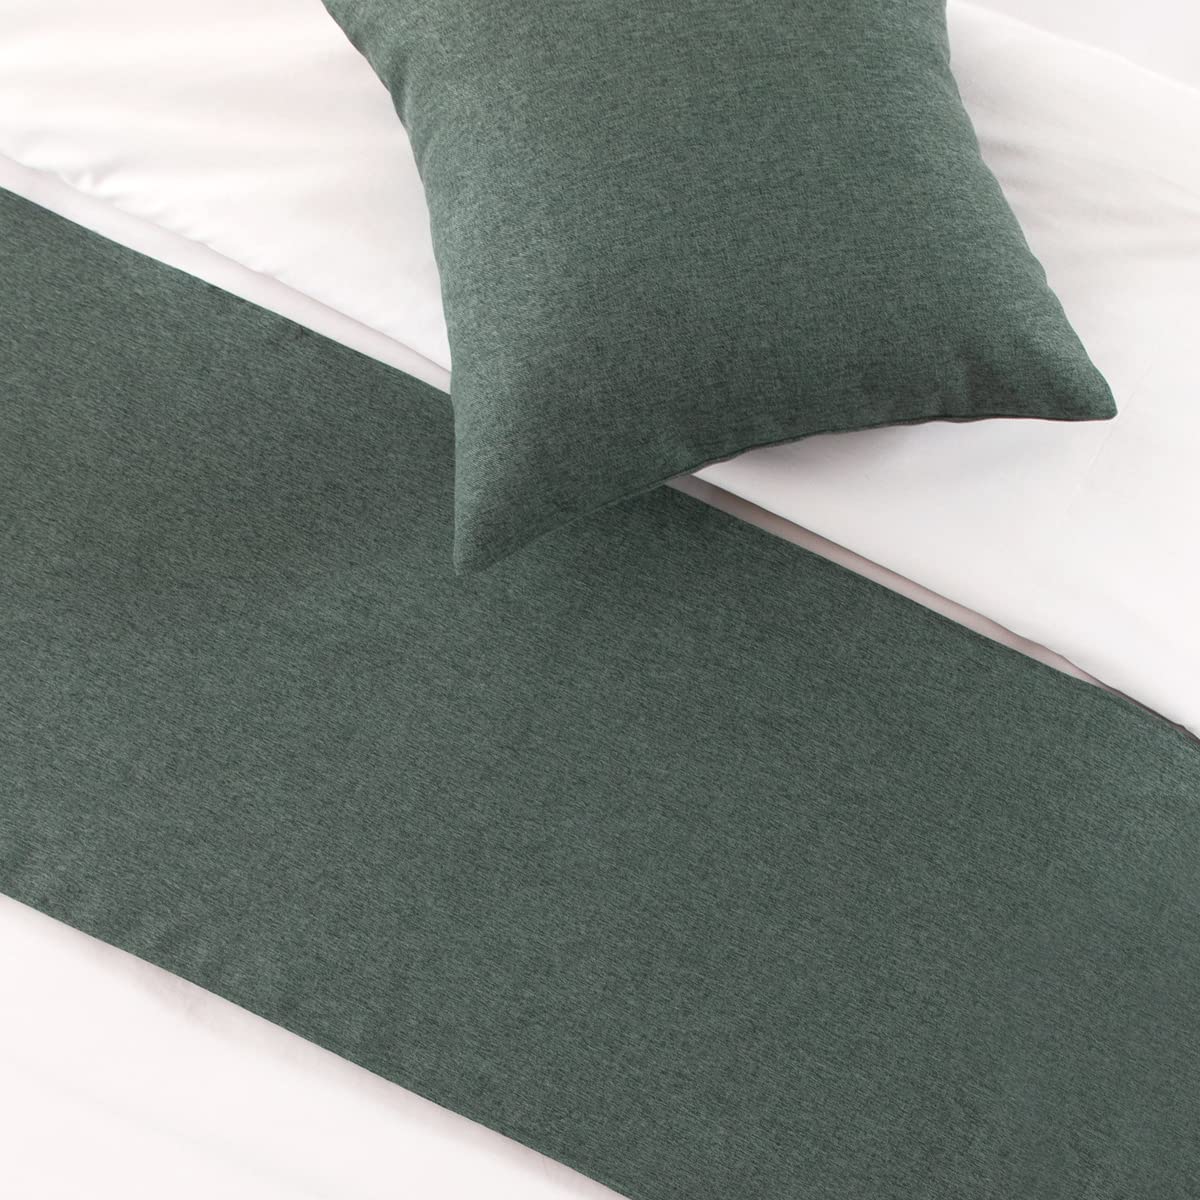 AMBERIS Bed Runner Blue-Green, Imitation Linen Decorative Bed Scarf for Home Hotel